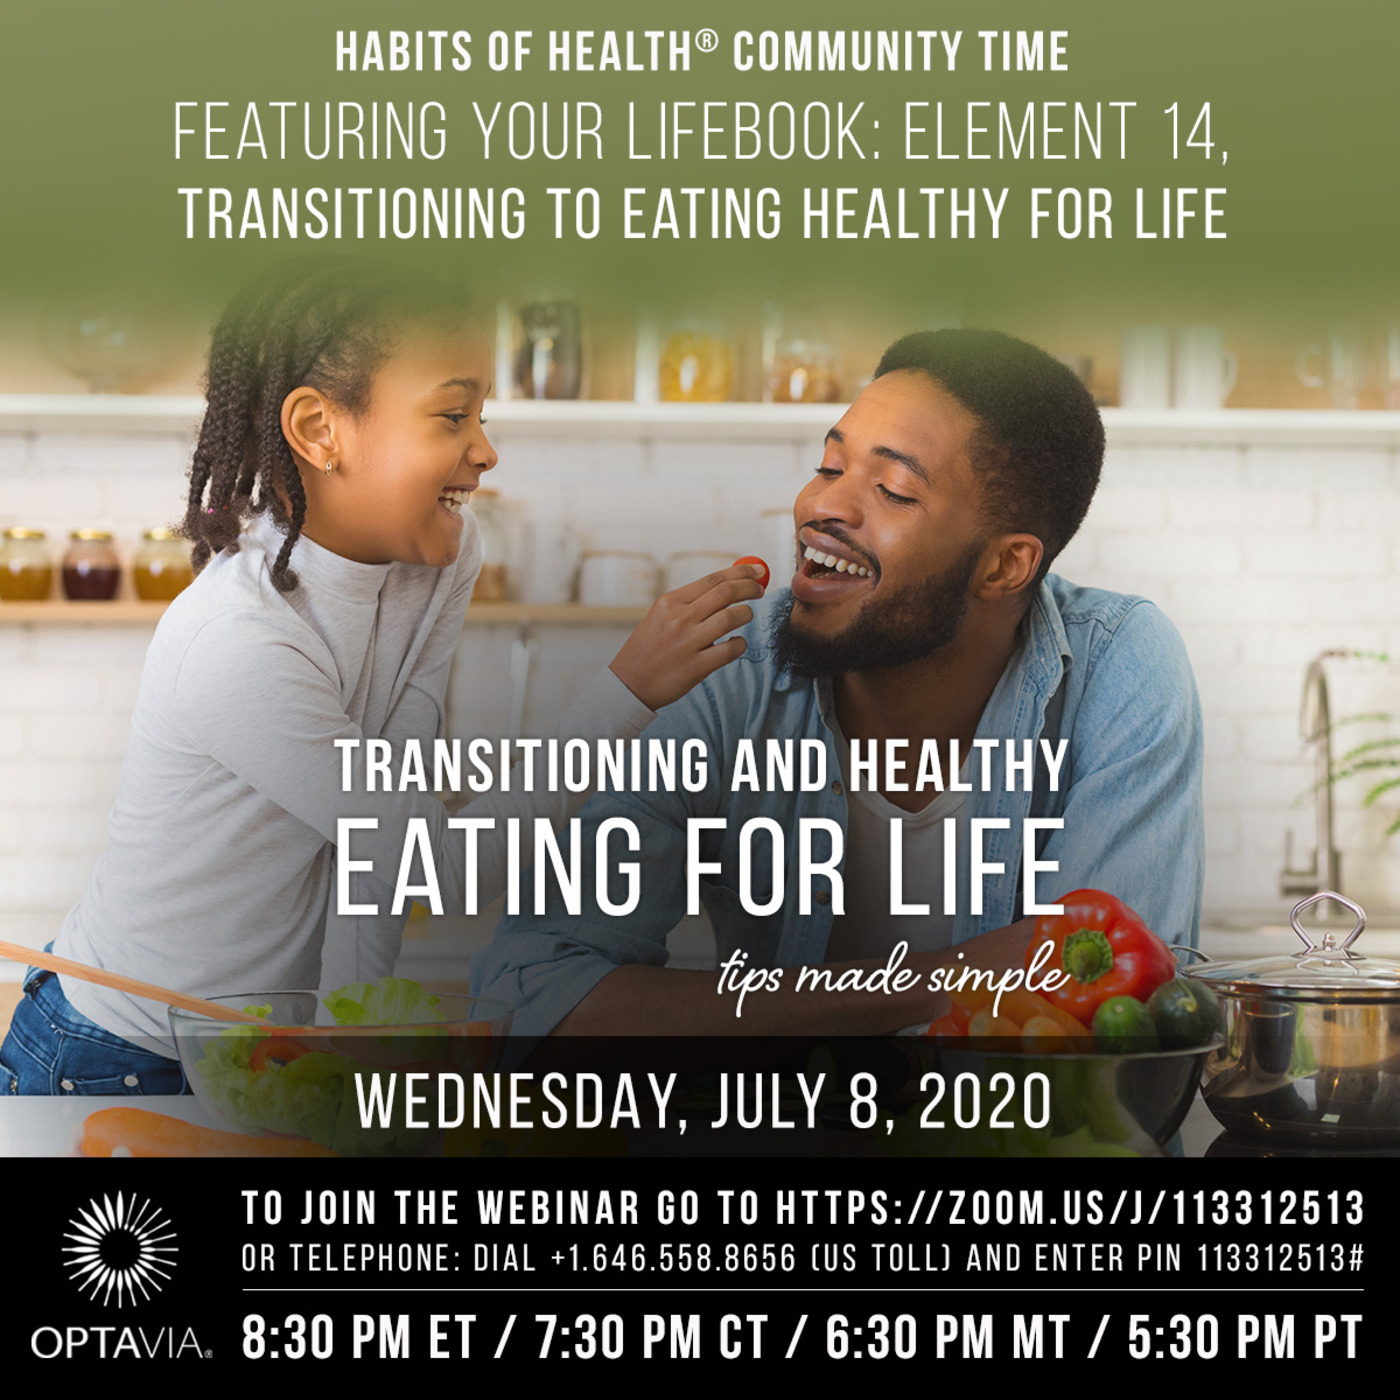 Your LifeBook, Element 14: Transitioning to Eating Healthy for Life